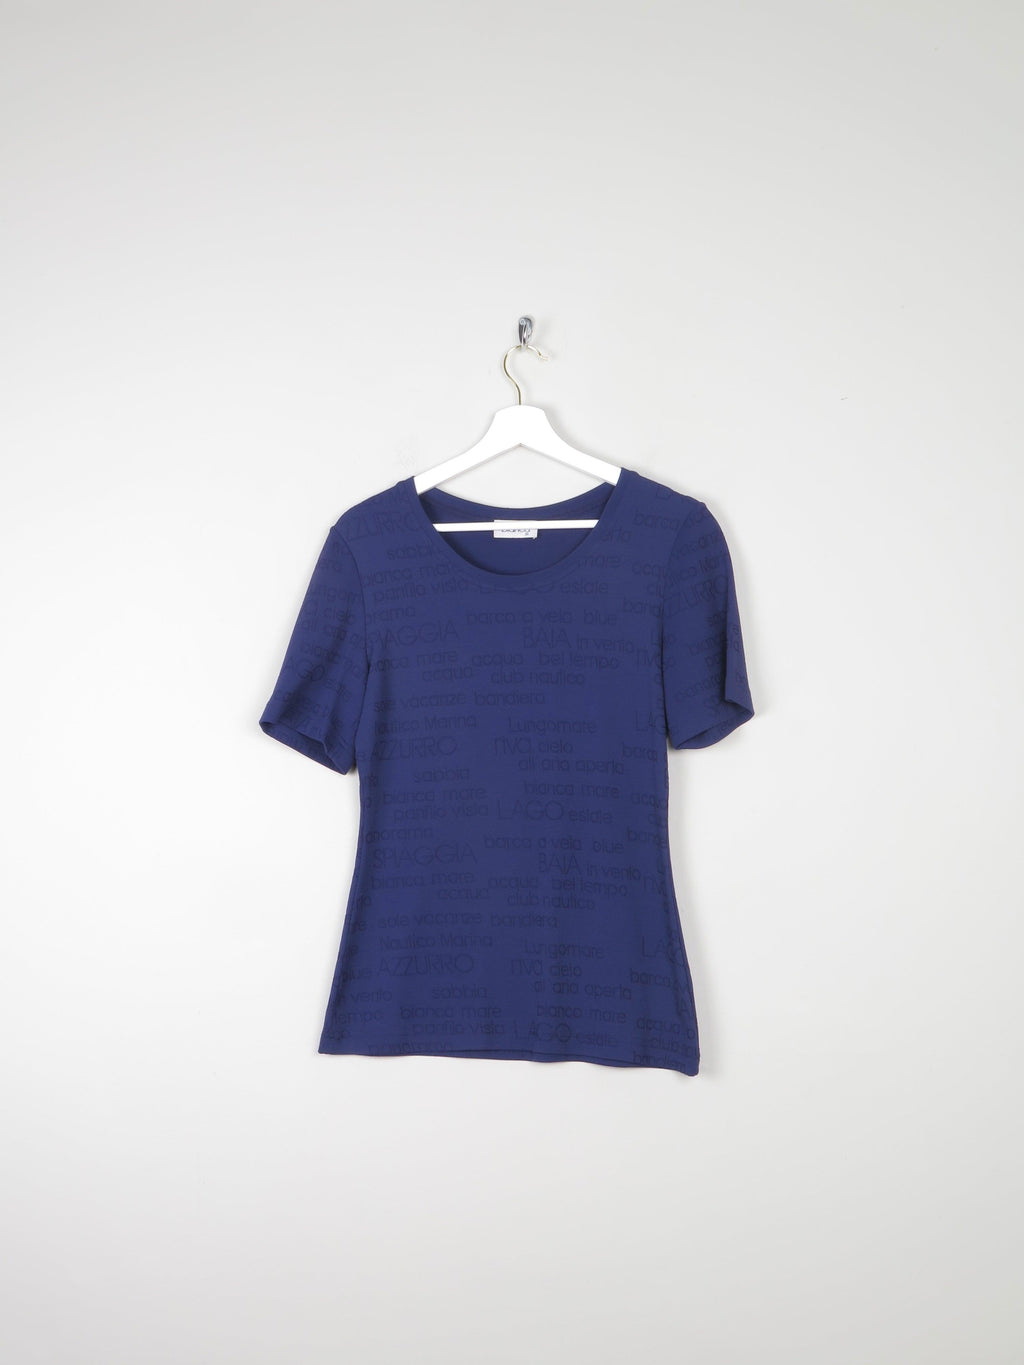 Women's Navy Bianca 1990s Top With Word Embossed Print S - The Harlequin